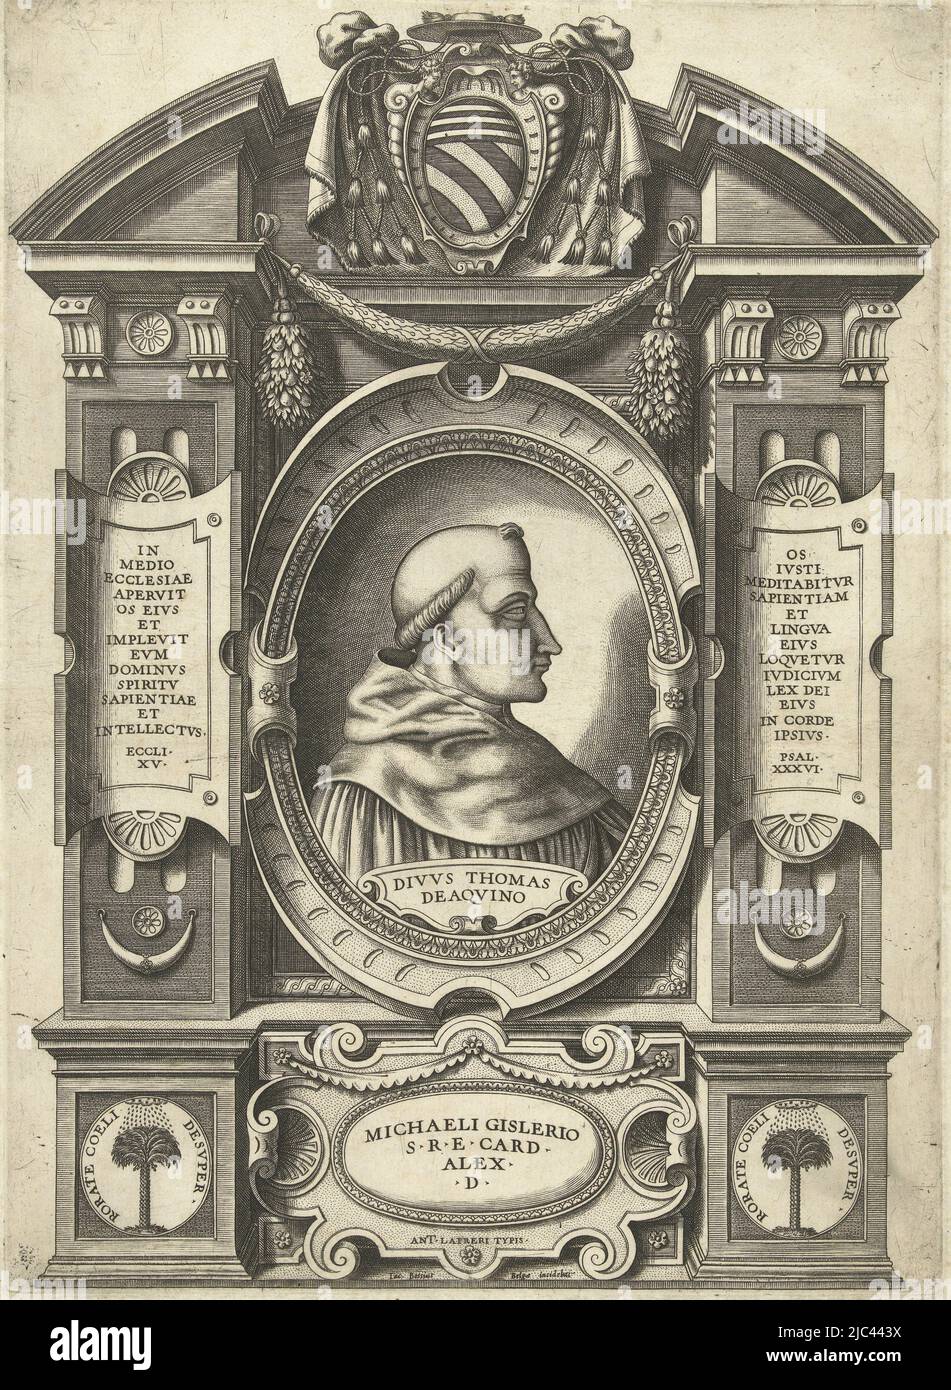 Portrait of Thomas Aquinas. Oval medallion with bust to right. The scholastic sage Thomas Aquinas is wearing a monk's habit. Two cartouches to left and right of portrait with Latin inscriptions. At top, a coat of arms. At bottom a cartouche with a dedication to Cardinal Michael Ghisleri., Thomas Aquinas, print maker: Jacob Bos, (mentioned on object), publisher: Antonio Lafreri, (mentioned on object), Antonio Michele Ghislieri, Rome, after c. 1557 - 1566, paper, engraving, h 332 mm × w 240 mm Stock Photo